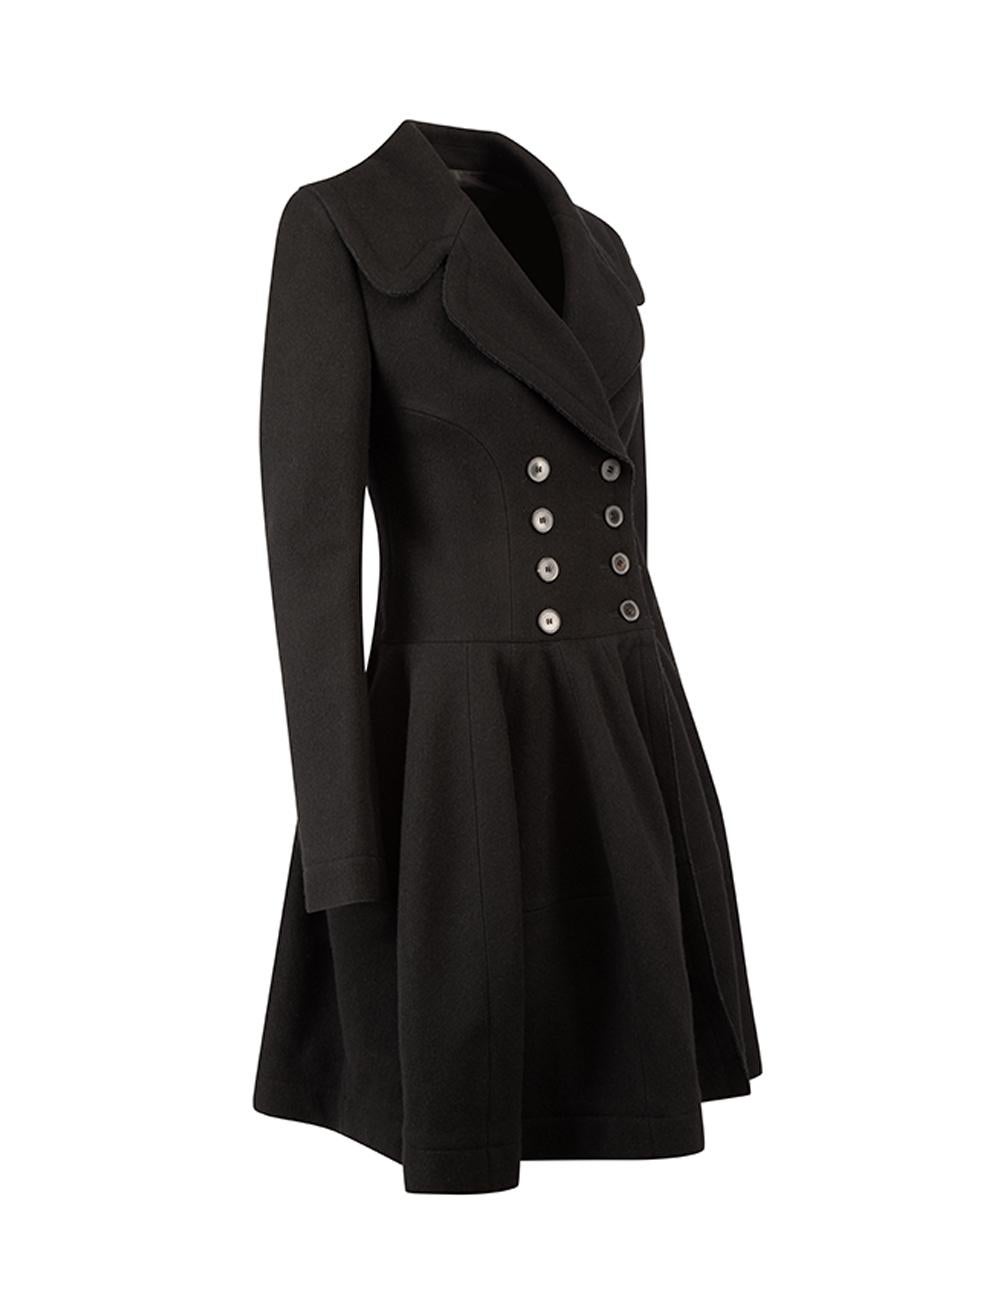 CONDITION is Good. Minor wear to coat is evident. Light wear to the rear collar edge and sleeve cuffs with slight bobbling on this used Alaïa designer resale item. 



Details


Black

Wool

Long coat

Double breasted

Skirted hemline





Made in